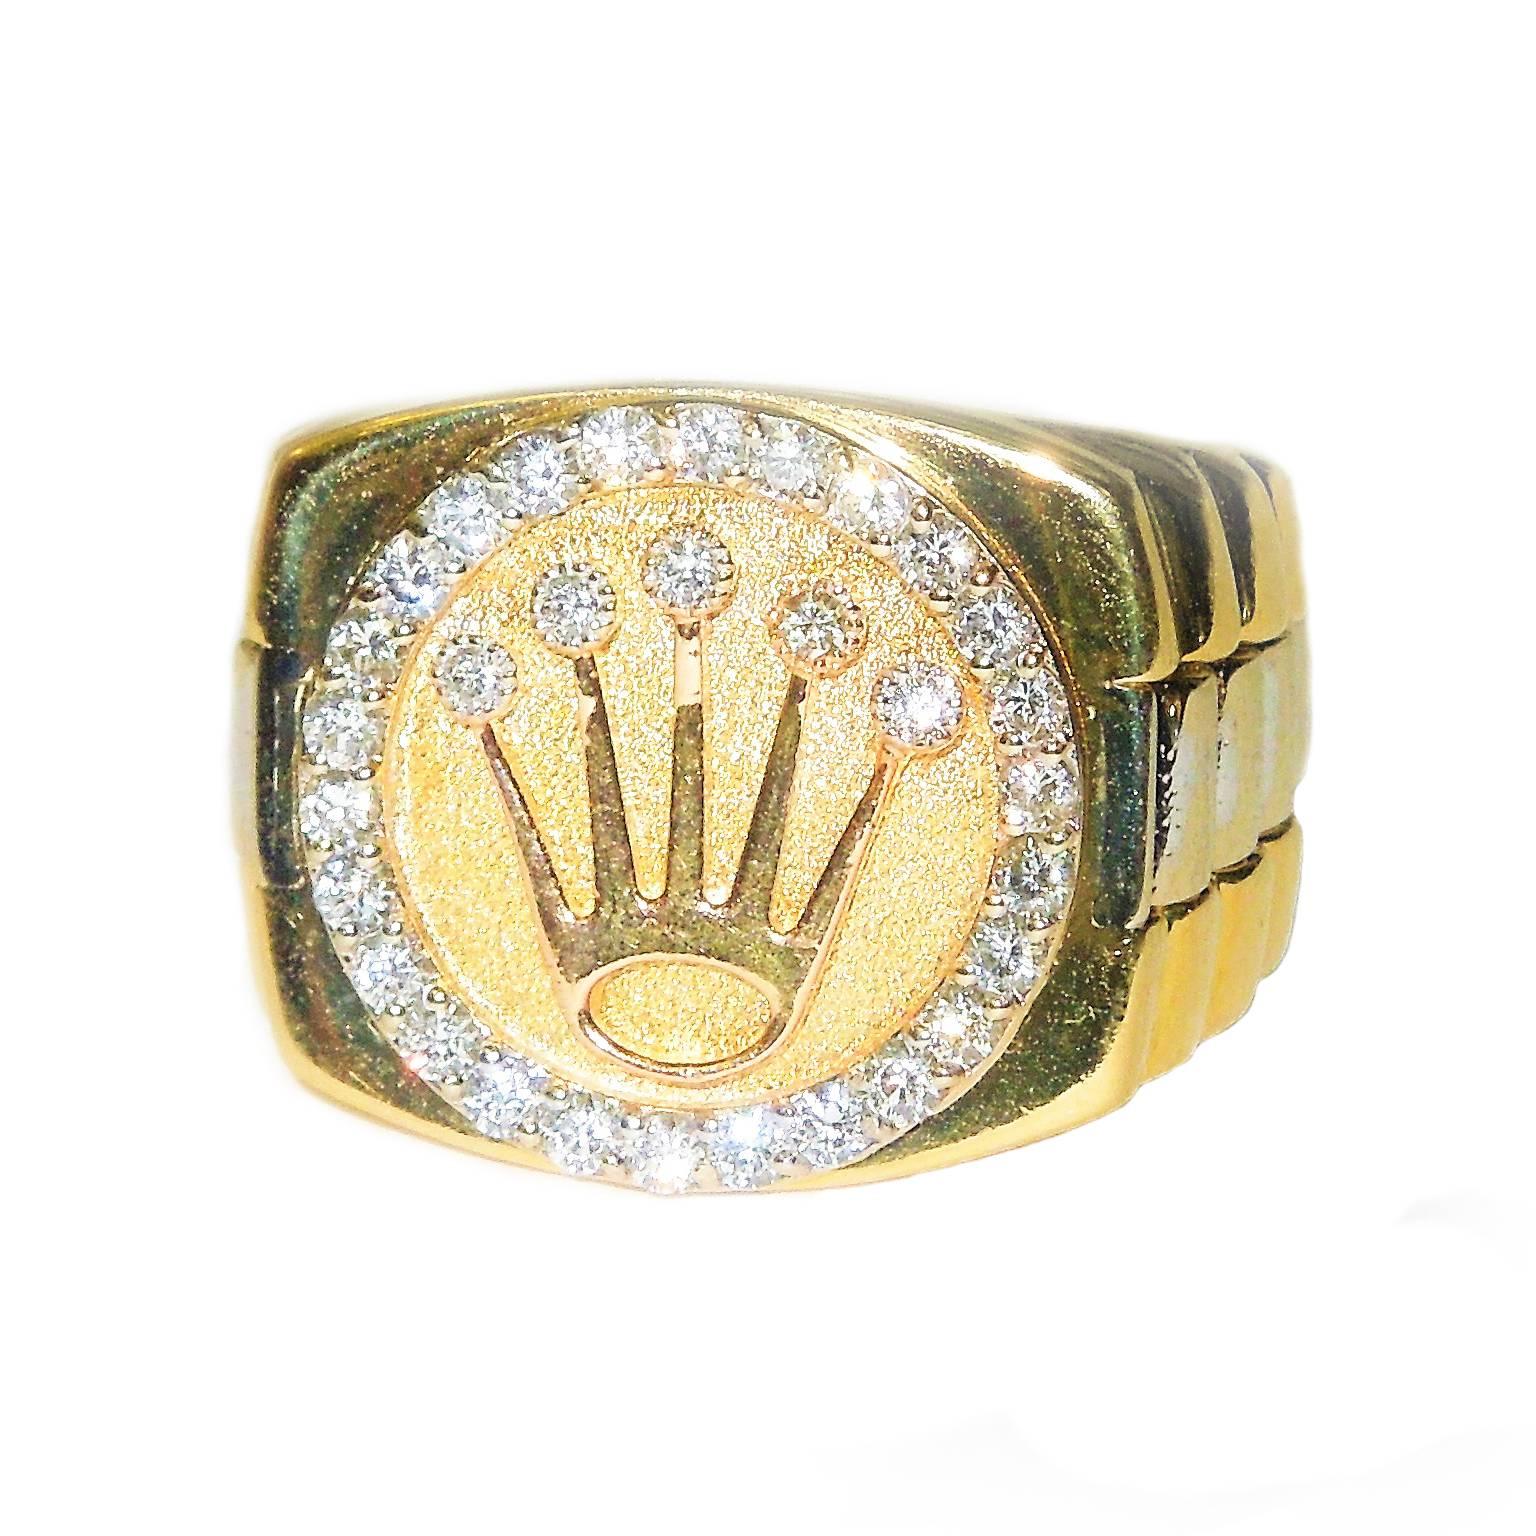 18K Gold and Diamond Crown Ring 

1.36ct. Diamonds

18.6 grams 18K Gold

0.8 face width
0.6 band width

Size 9.5 but sizable

Estate